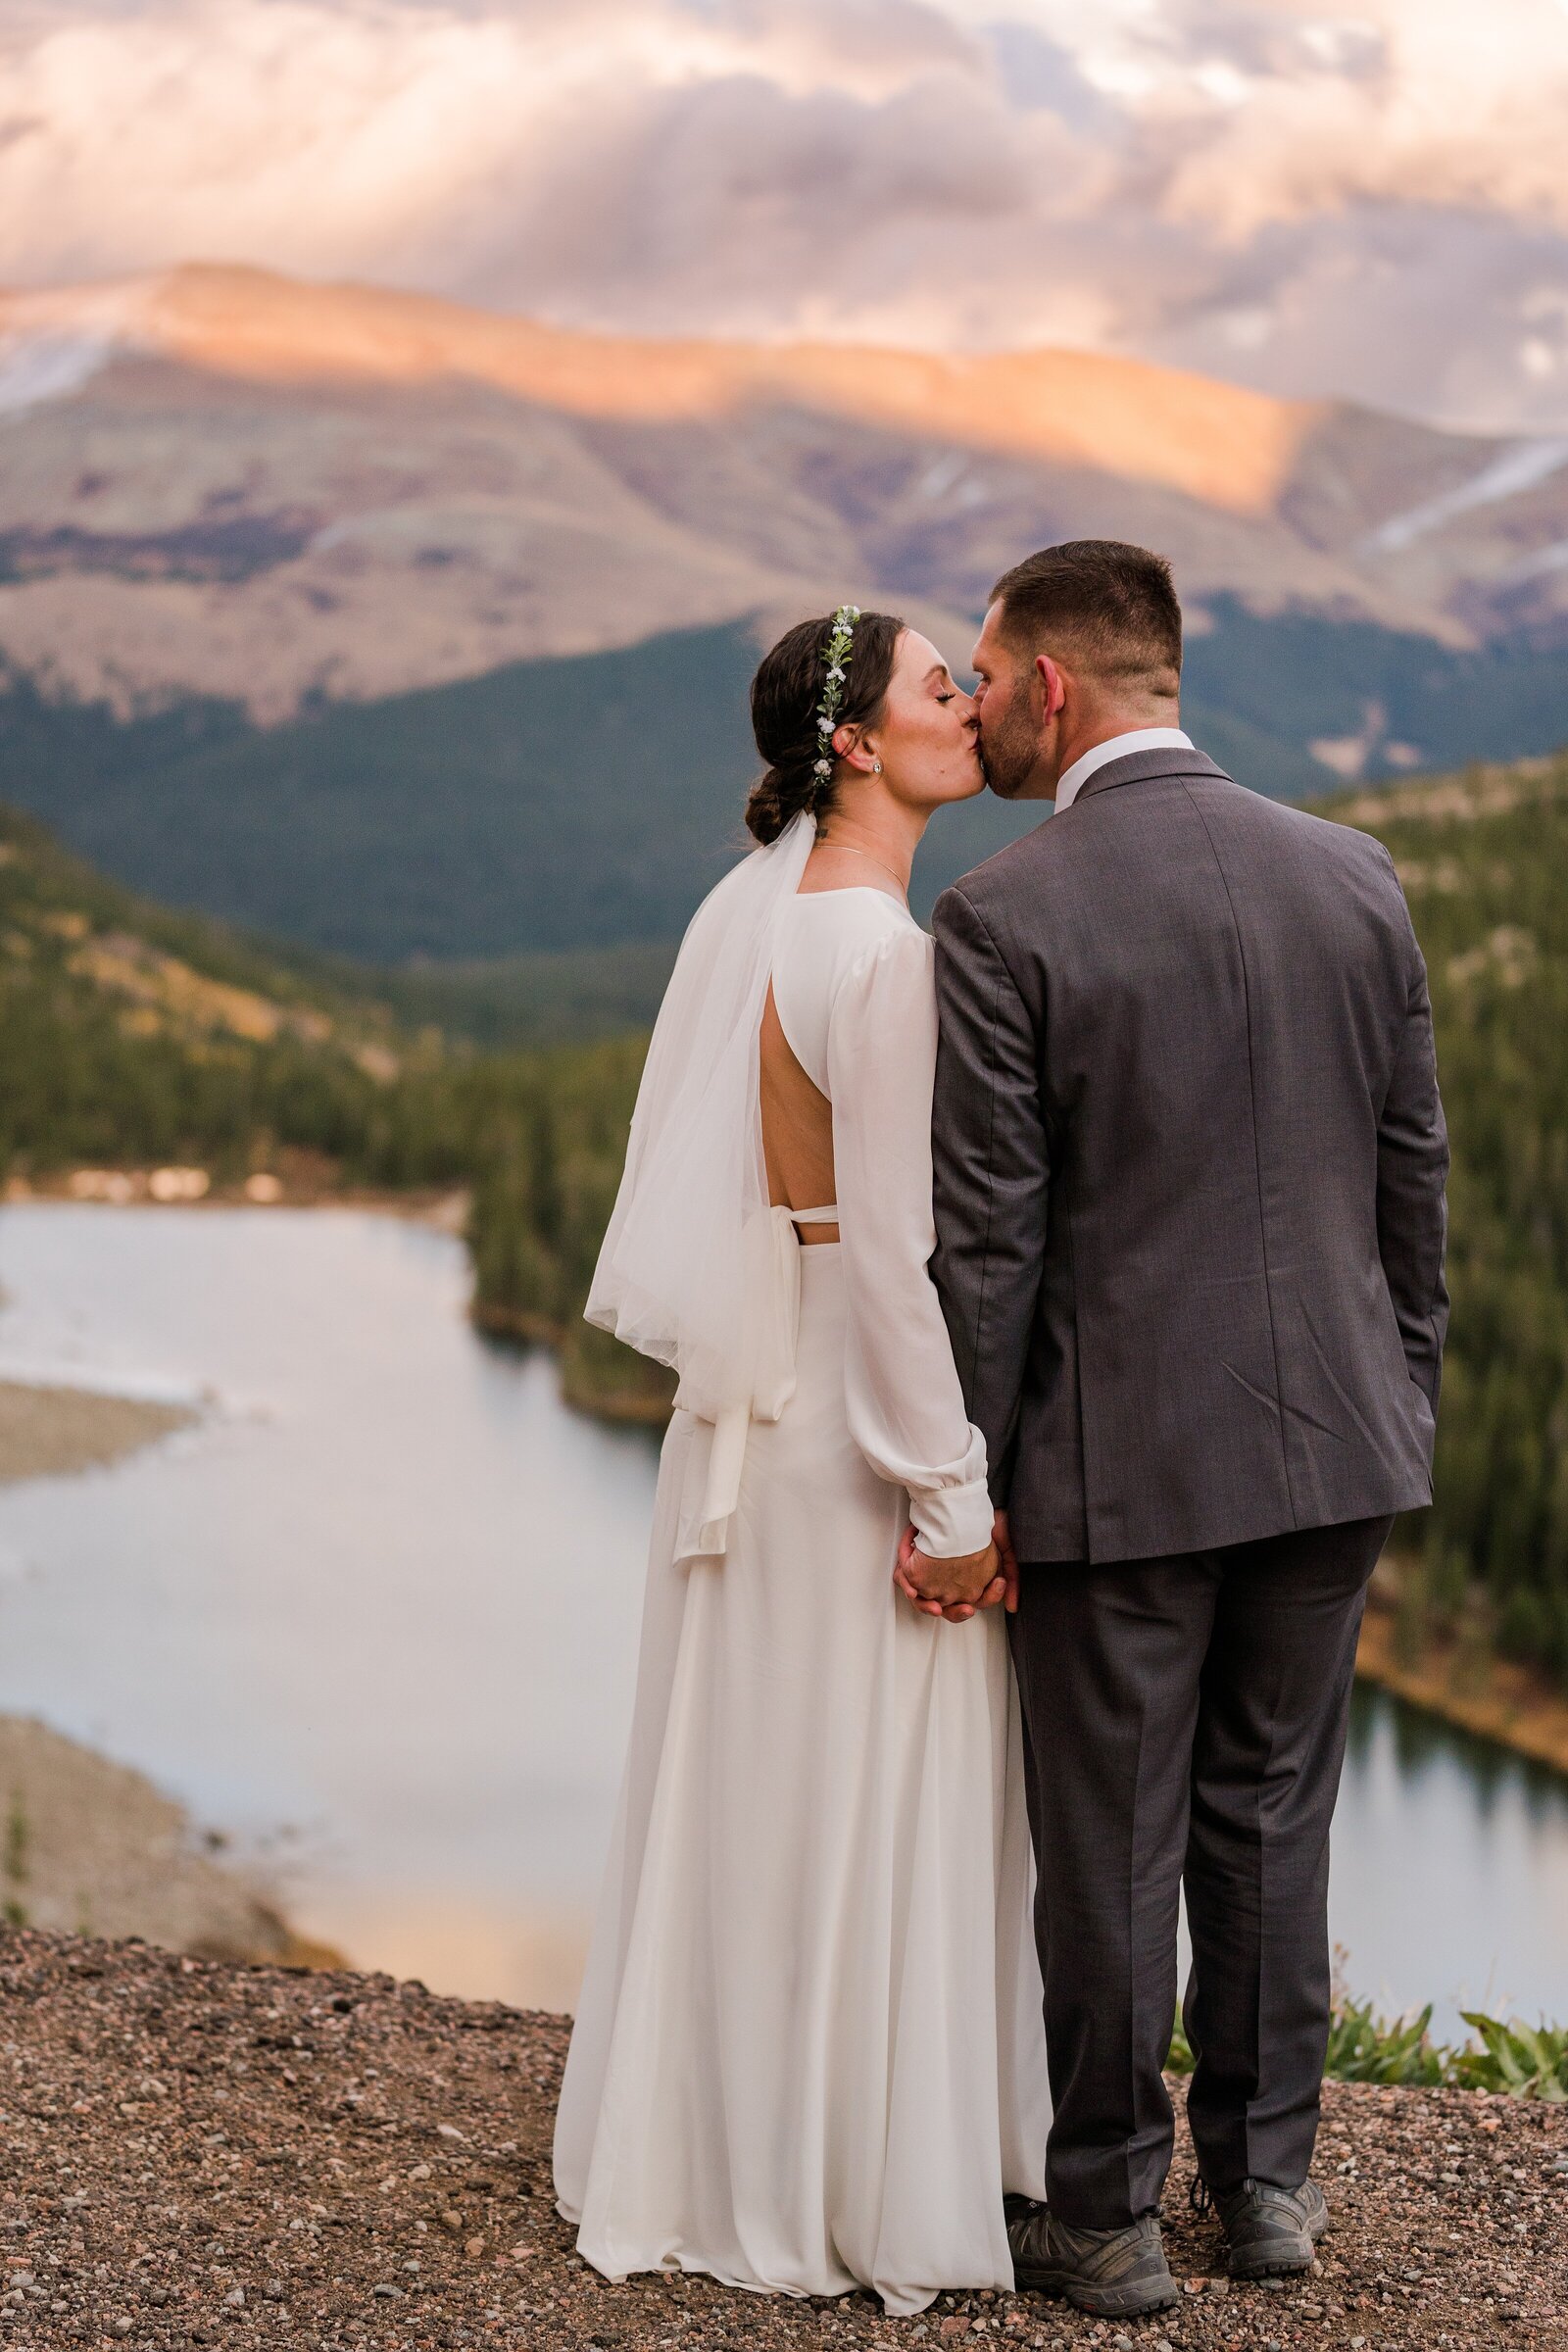 Rocky Mountains Elopement: A Story of Adventure and Love" - Adventure elopement photography, intimate wedding photography, authentic storytelling, experienced wedding photographer